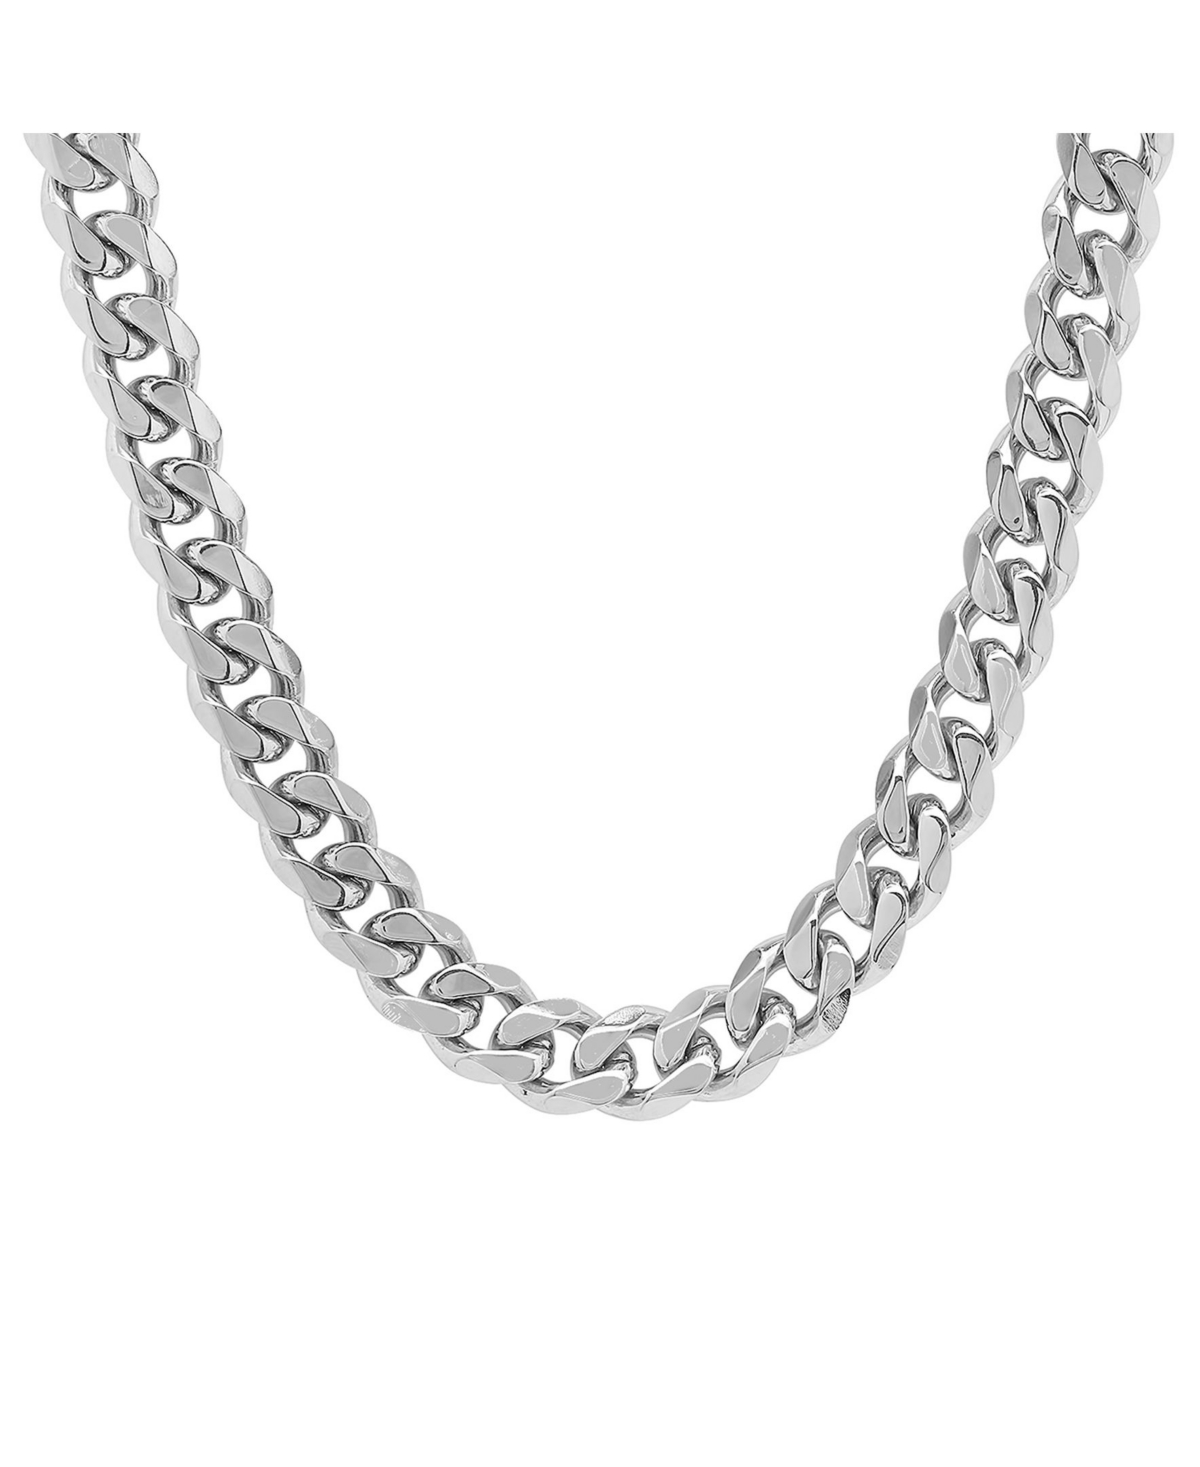 Men's Stainless Steel Thick Accented Cuban Link Style Chain Necklaces - Silver